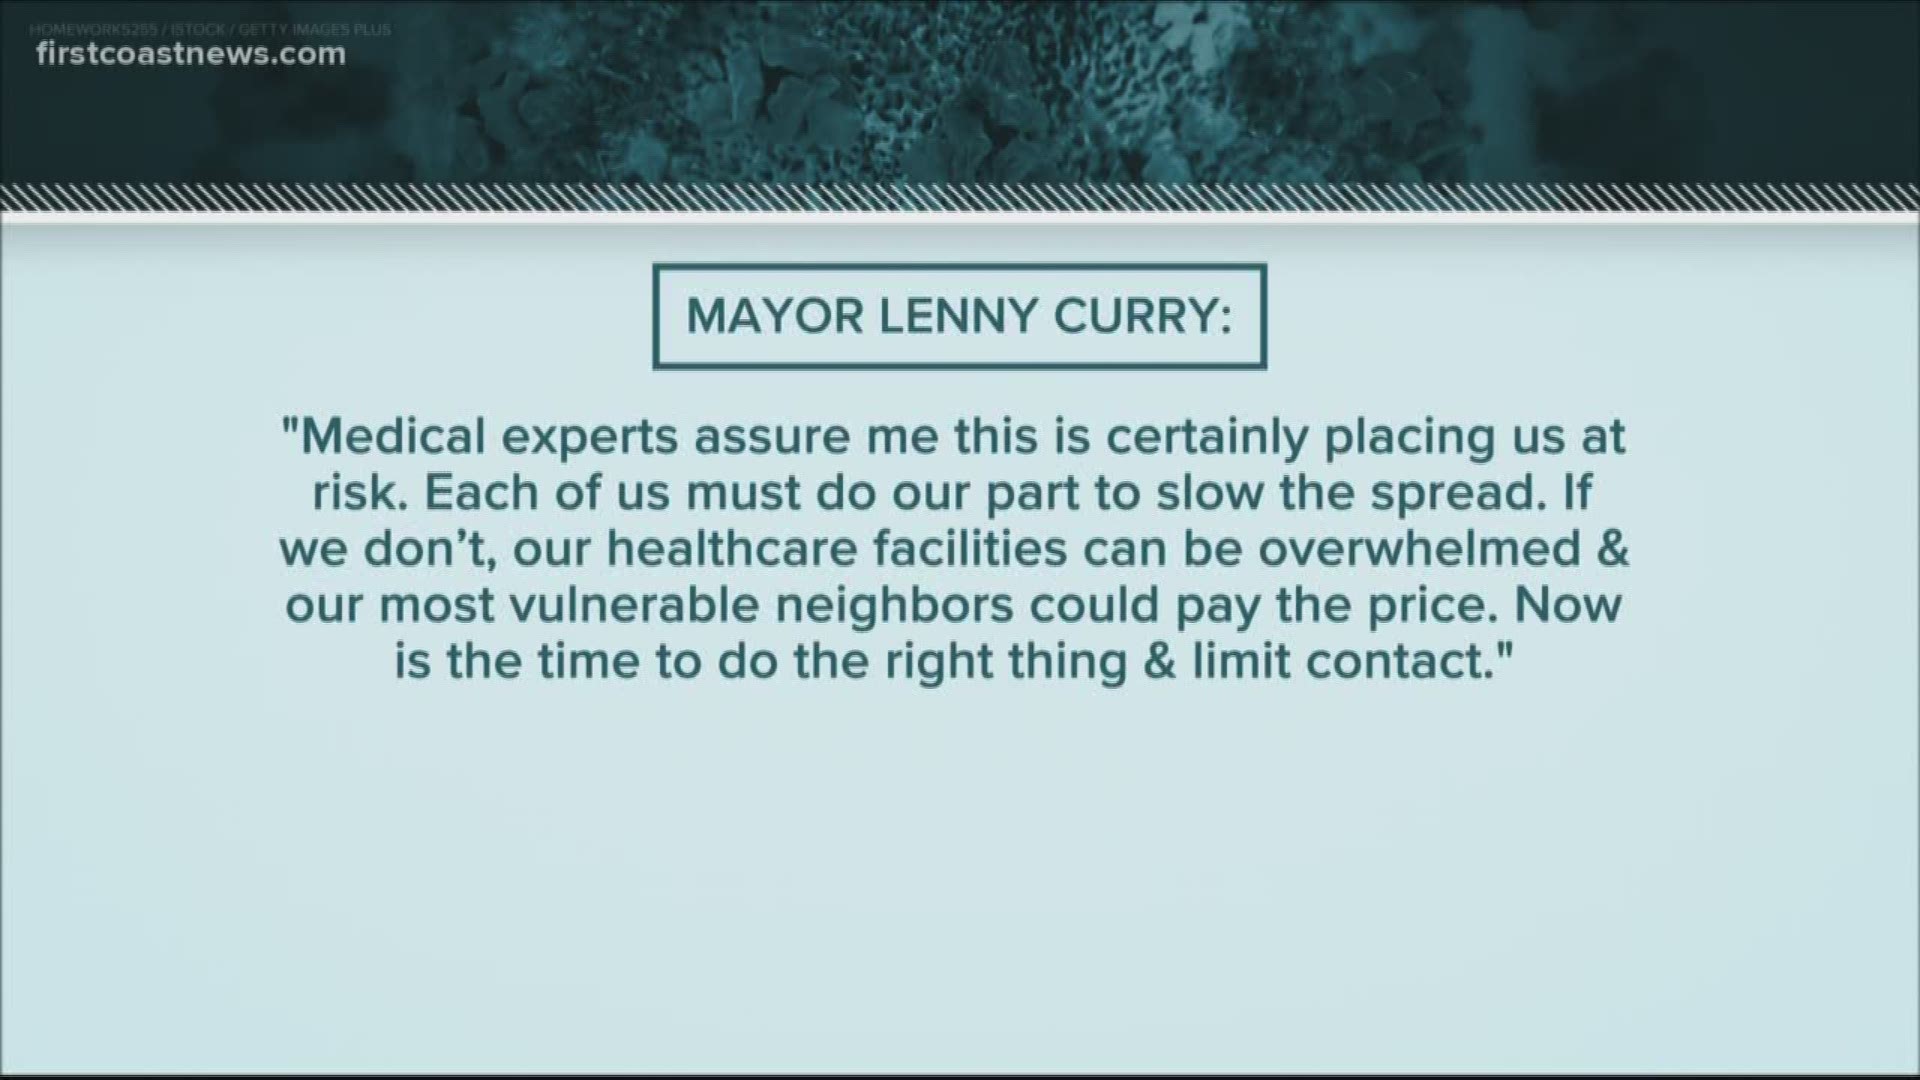 Curry said the City of Jacksonville has the ability to "implement curfews, restrict numbers of patrons at businesses" to reduce the spread of COVID-19.